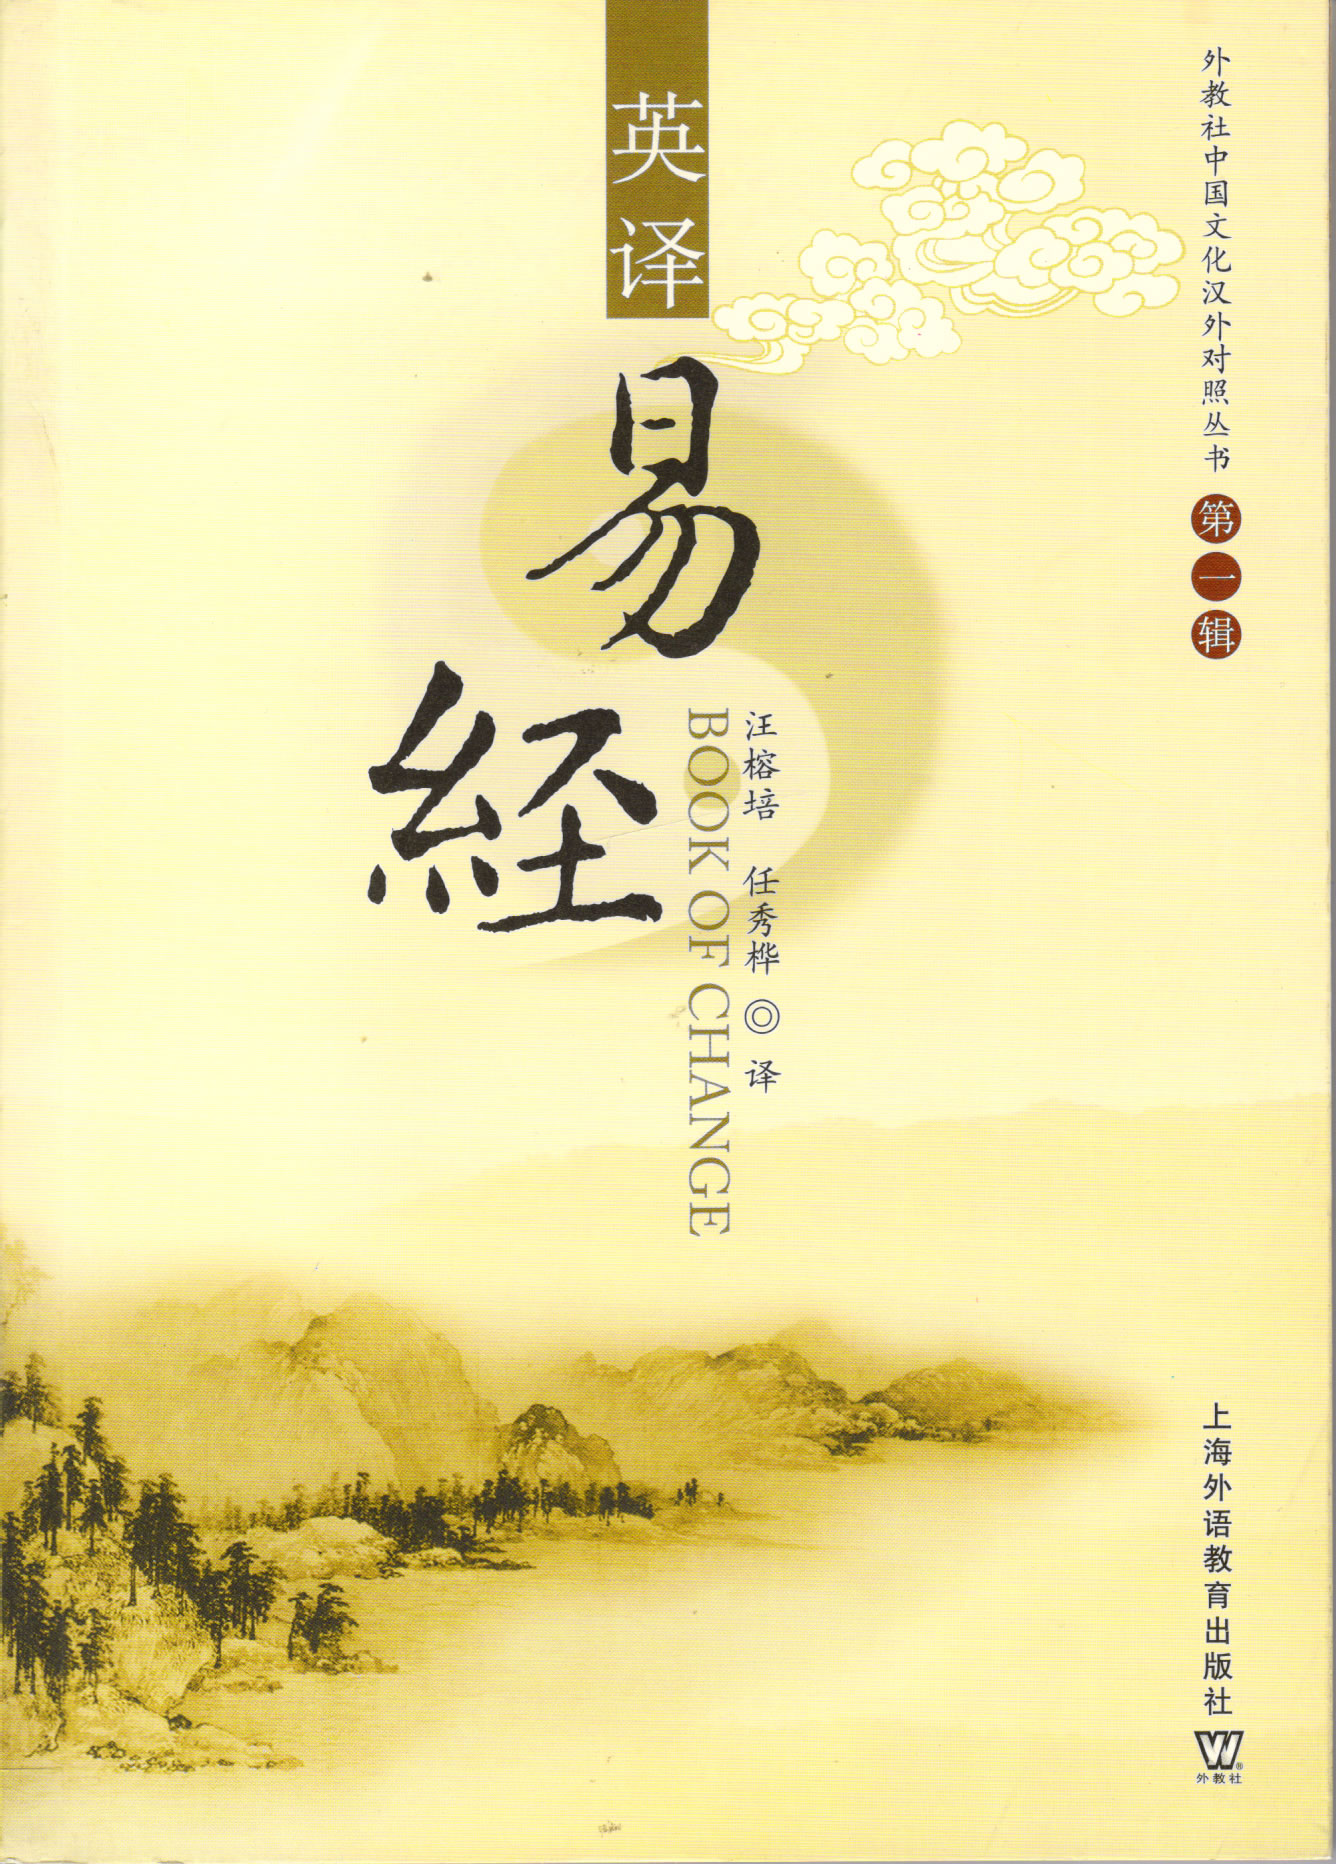 Book of Change (bilingual Chinese-English)<br>ISBN: 978-7-5446-0463-5, 9787544604635